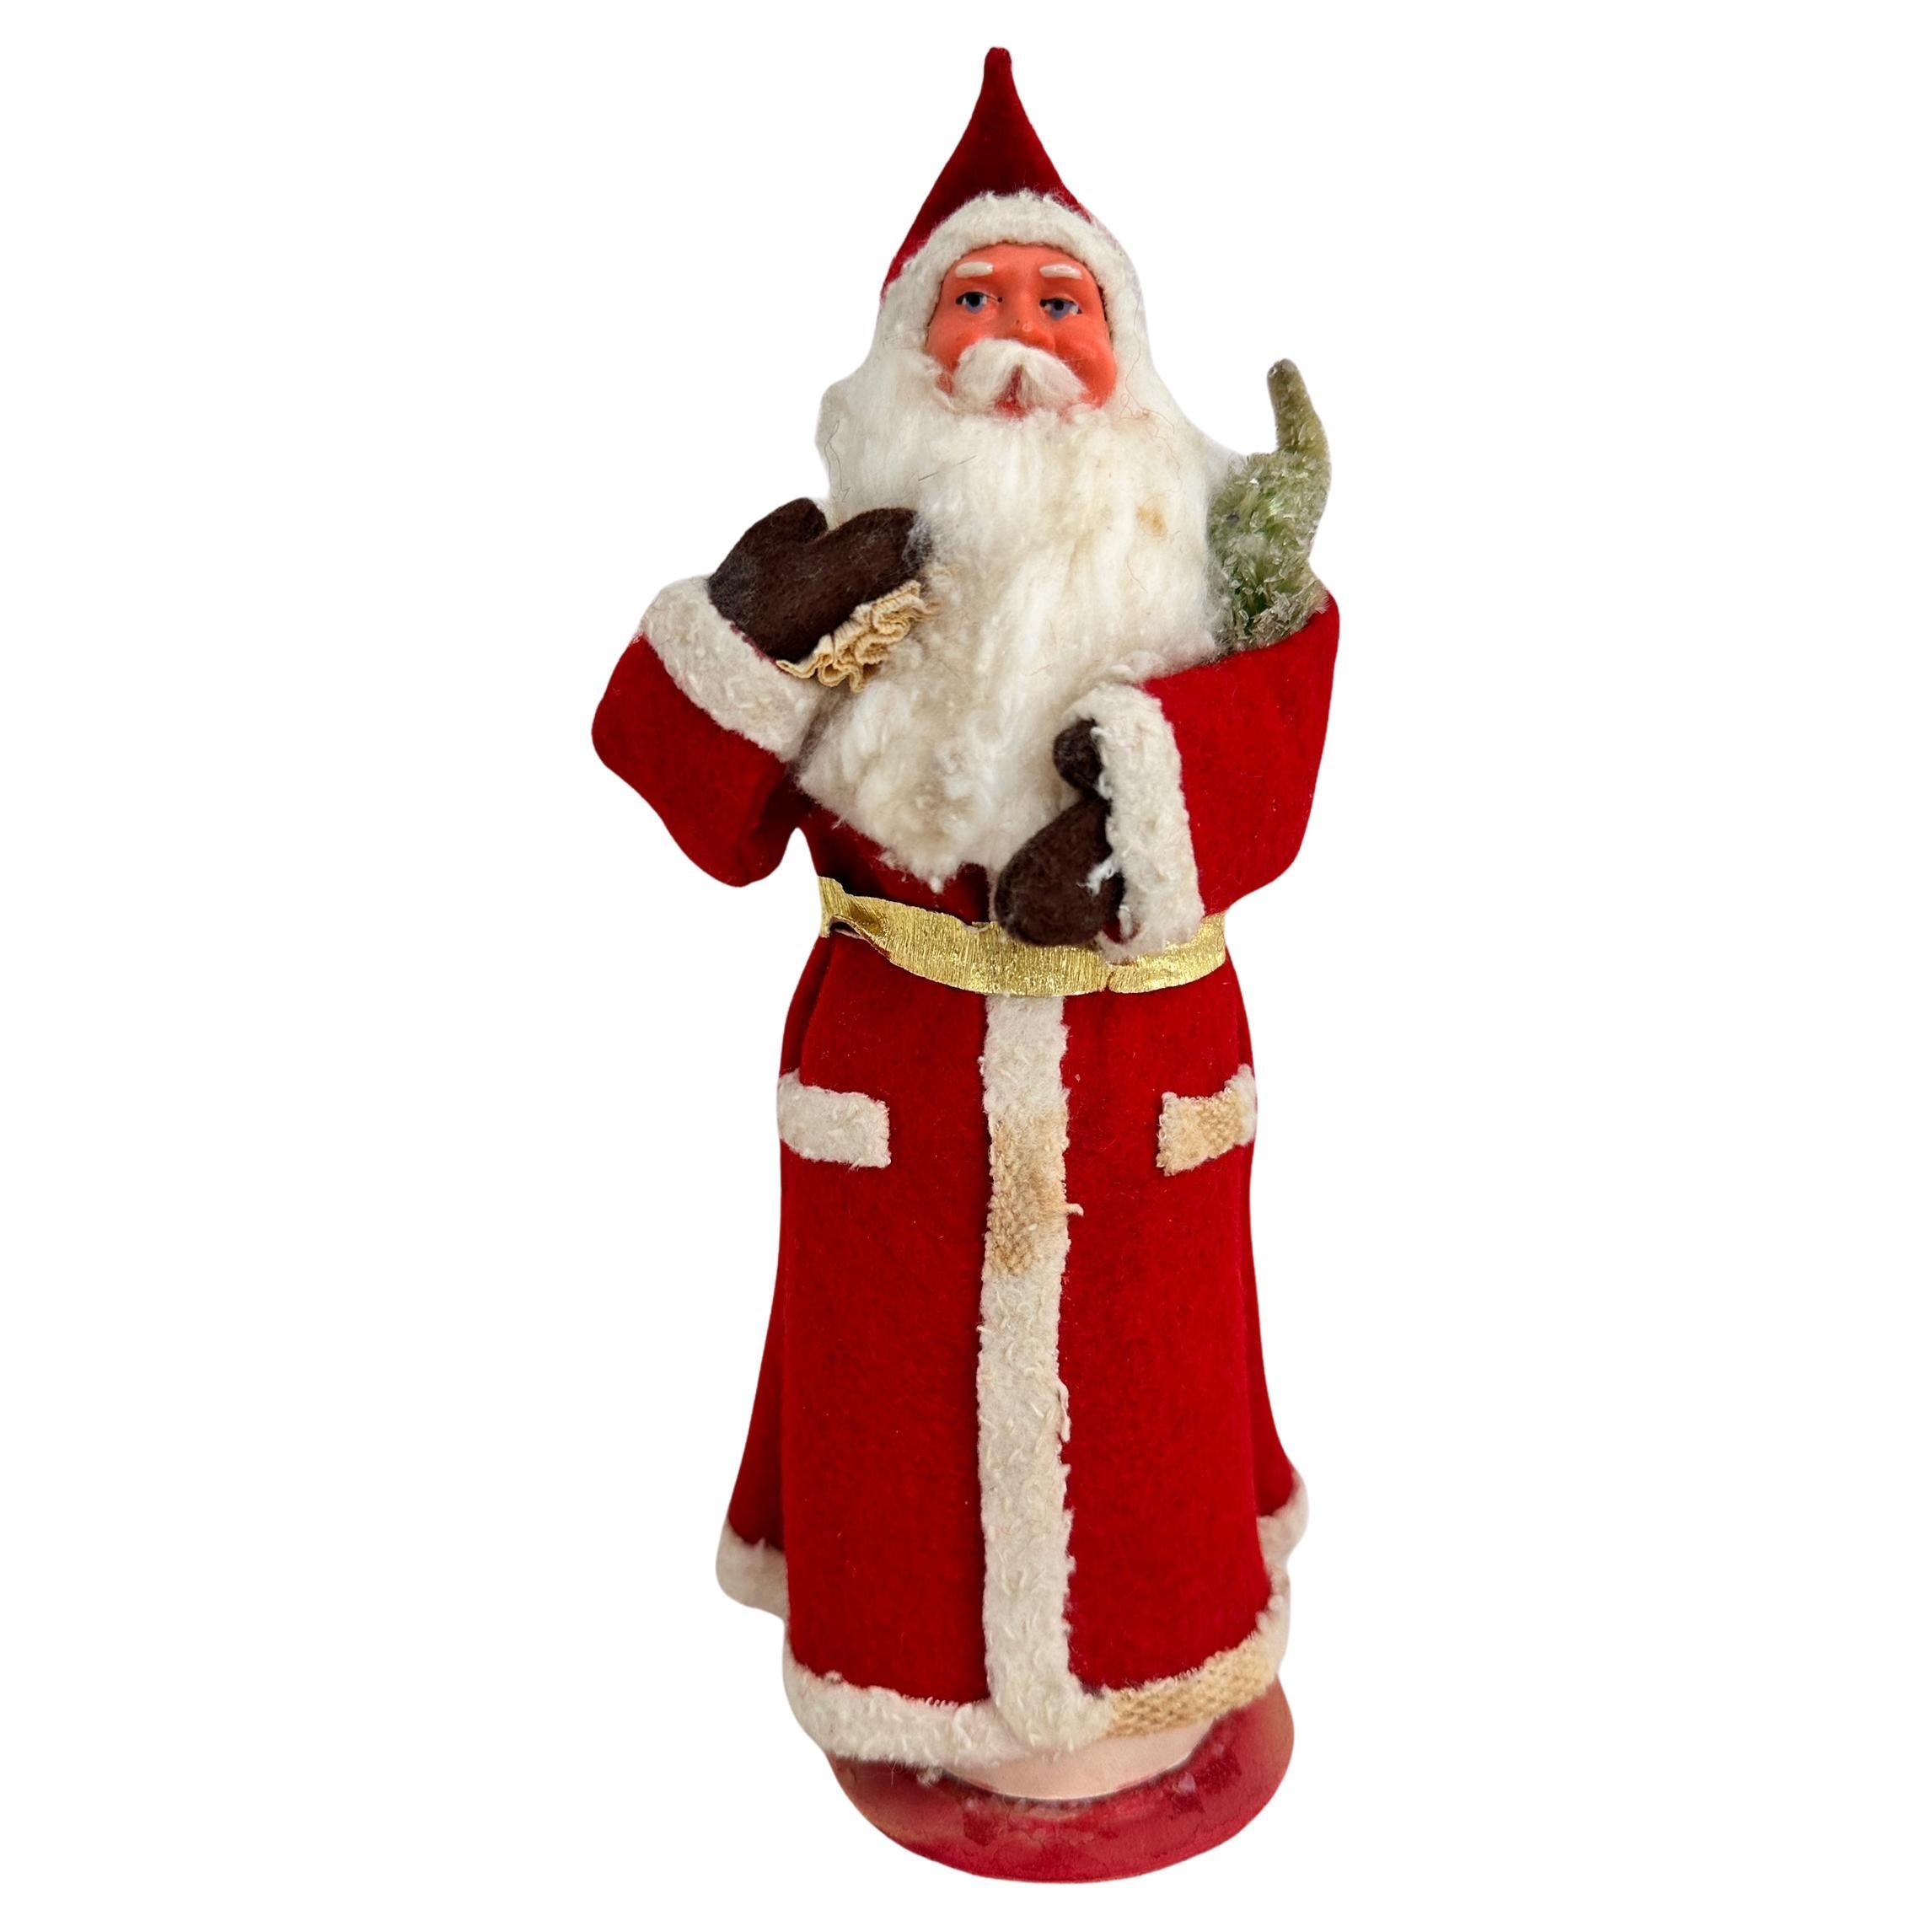 Stunning Christmas Vintage St. Nikolaus Santa Claus Belsnickel Candy Container For Sale